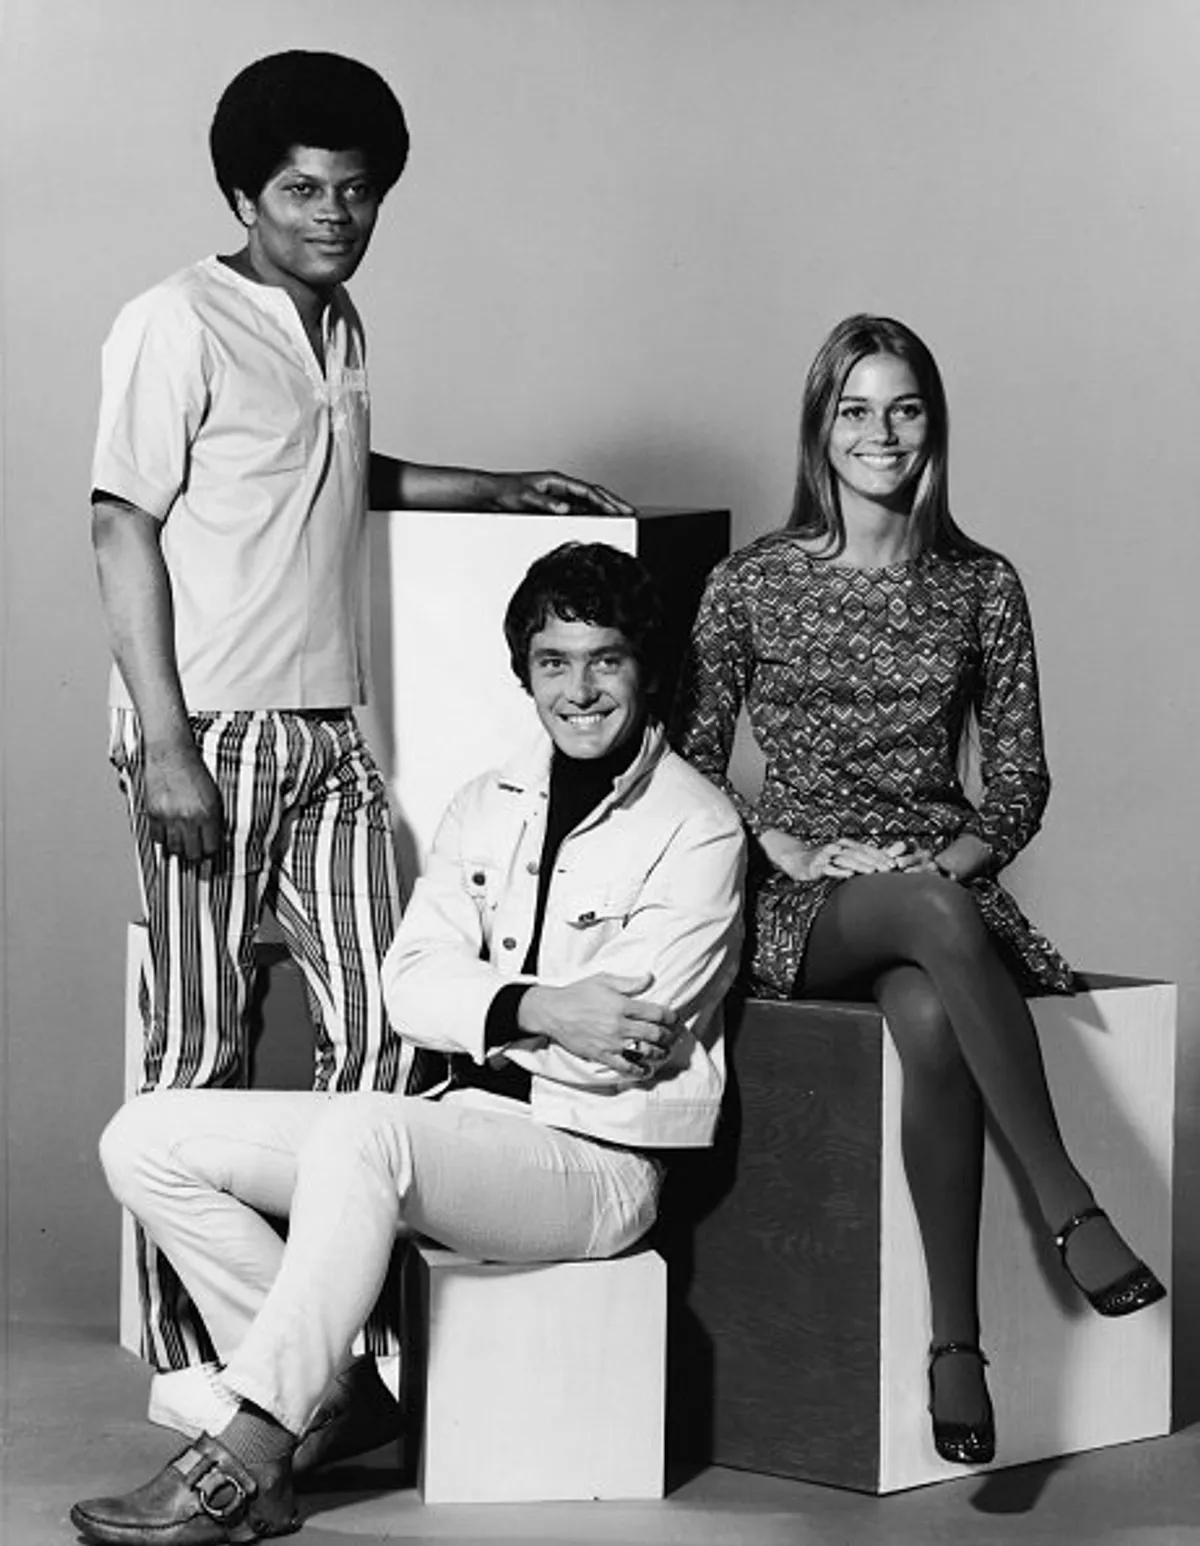 Clarence Williams III, Michael Cole, and Peggy Lipton during their promotional studio portrait for the TV series, "The Mod Squad" in 1968. | Photo: Getty Images